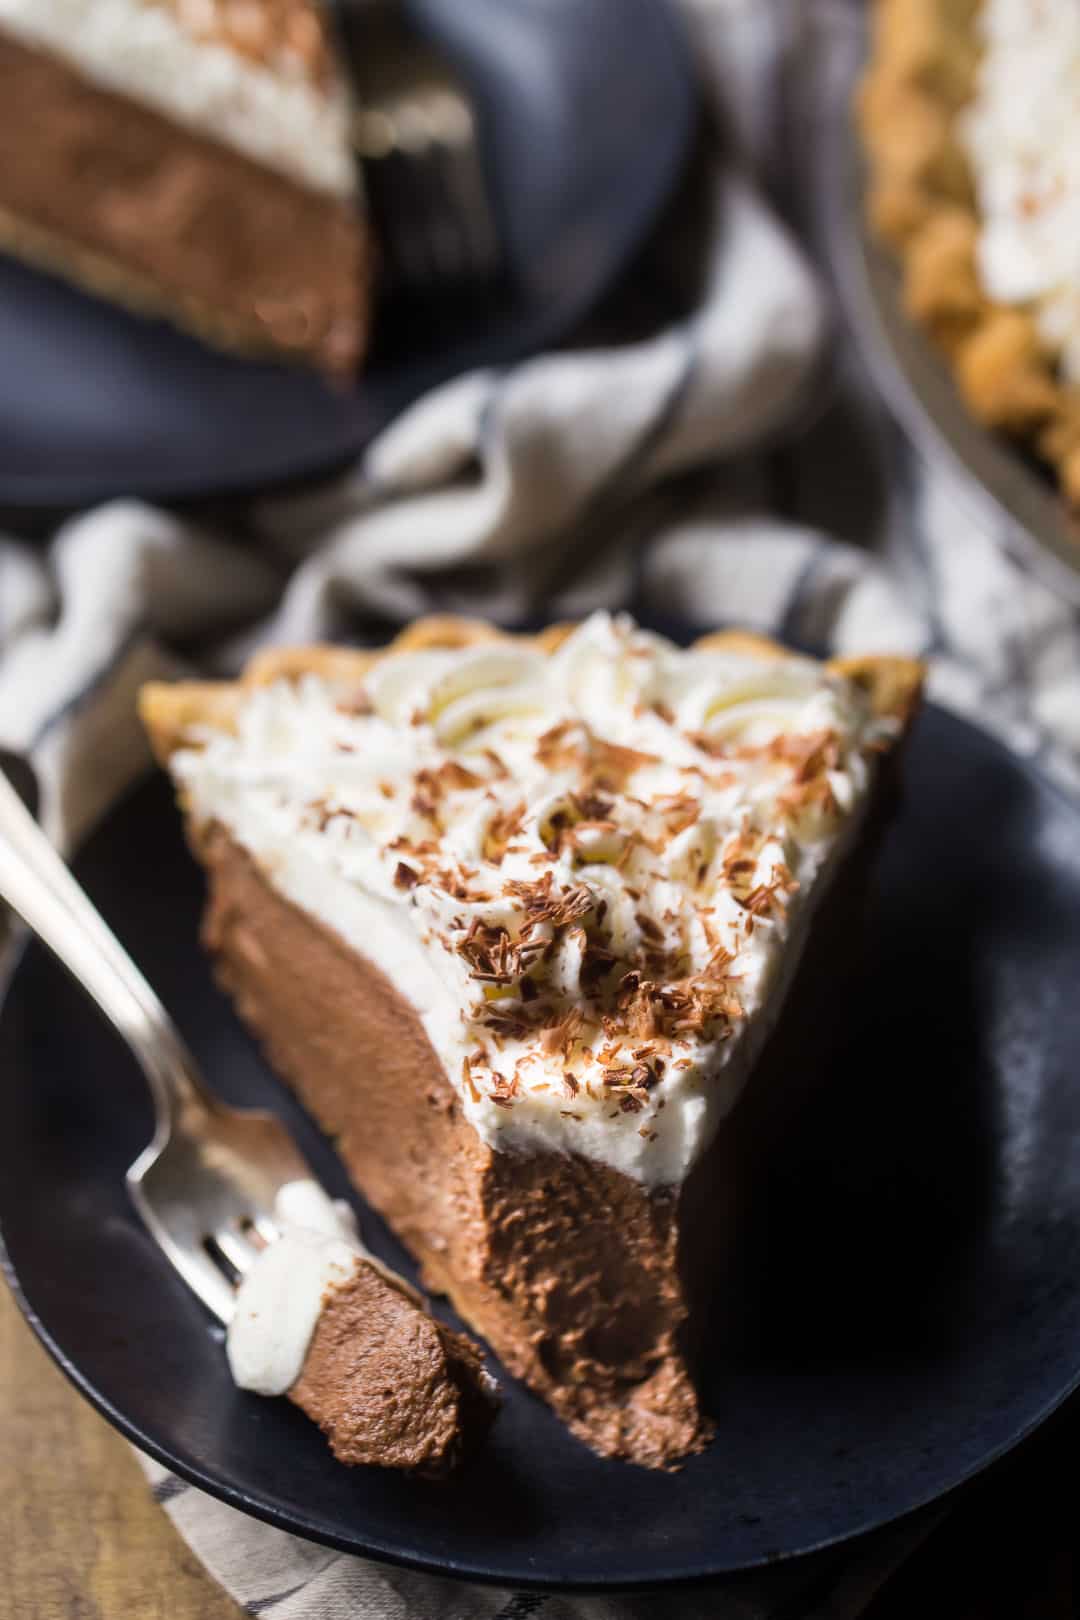 Thick slice of homemade chocolate cream pie with whipped cream and chocolate shavings.